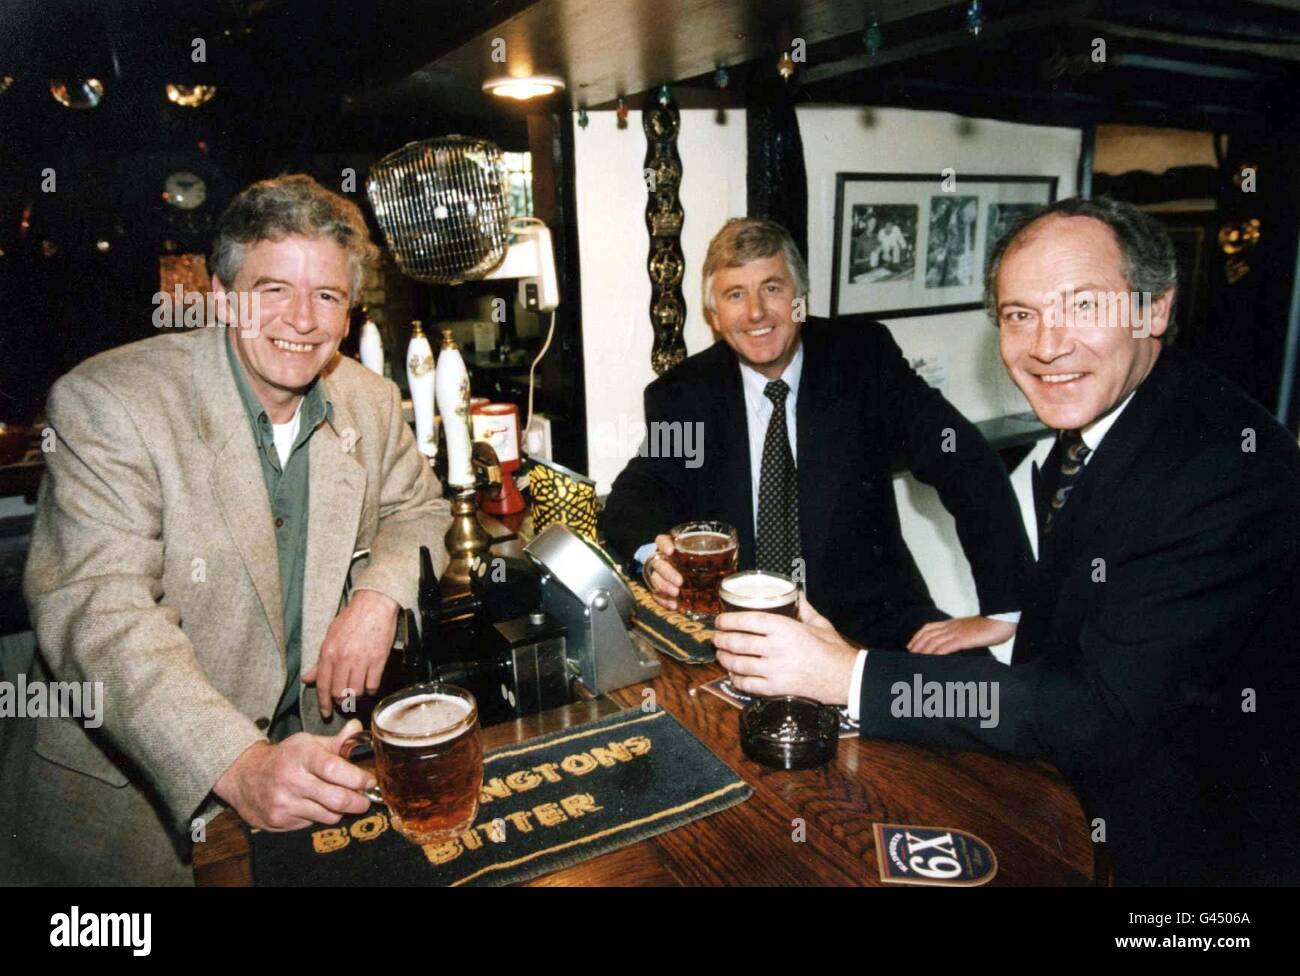 Paul Smith (far right), Chief Executive of Discovery Inns, and his Finance Director Philip Cropley (centre), enjoying a pint with actor Alan Devereux who plays Sid Perks, the fictional landlord in the radio serial The Archers, in the bar of The Old Bull at Inkberrow, one of its 279 pubs and the inspiration for The Bull in The Archers' village of Ambridge. It was annopunced today (Sunday) that pre-tax profits for the group rose by 50% to 3 million. See PA Story CITY Discovery/PA. Stock Photo